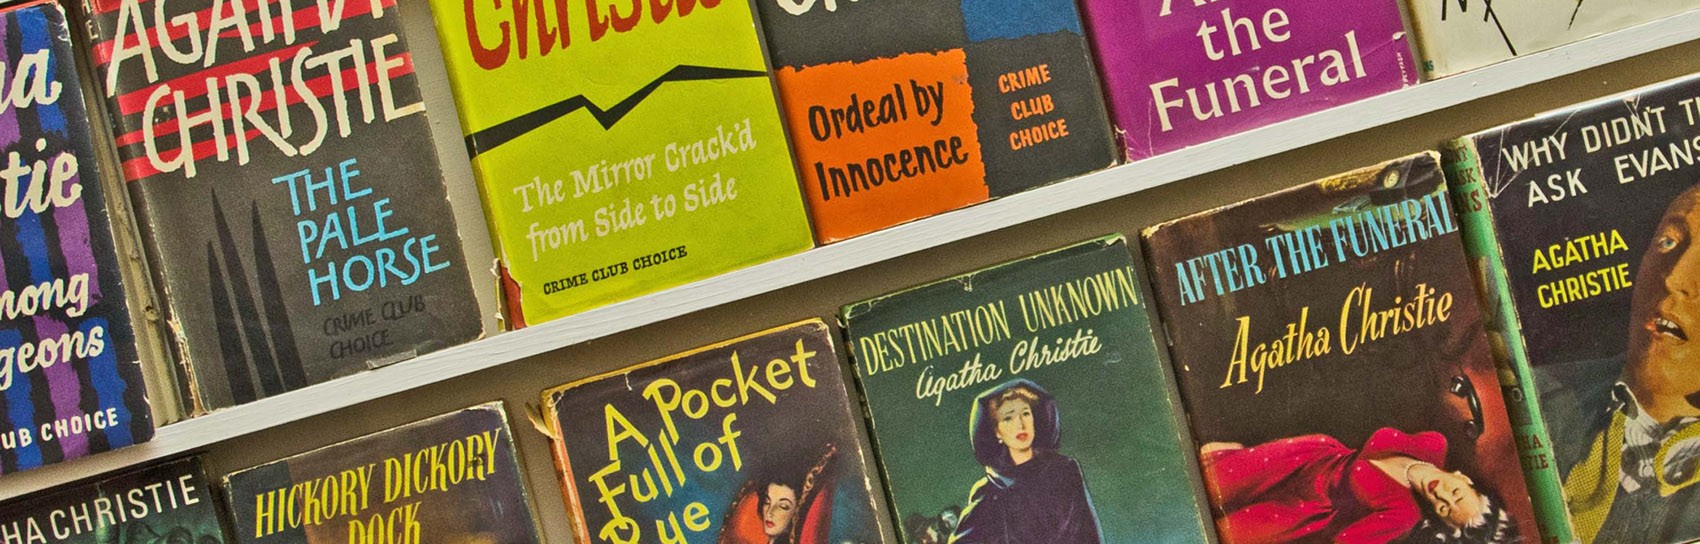 First editions of Agatha Christie's books. Photograph by ALEX GRAEME